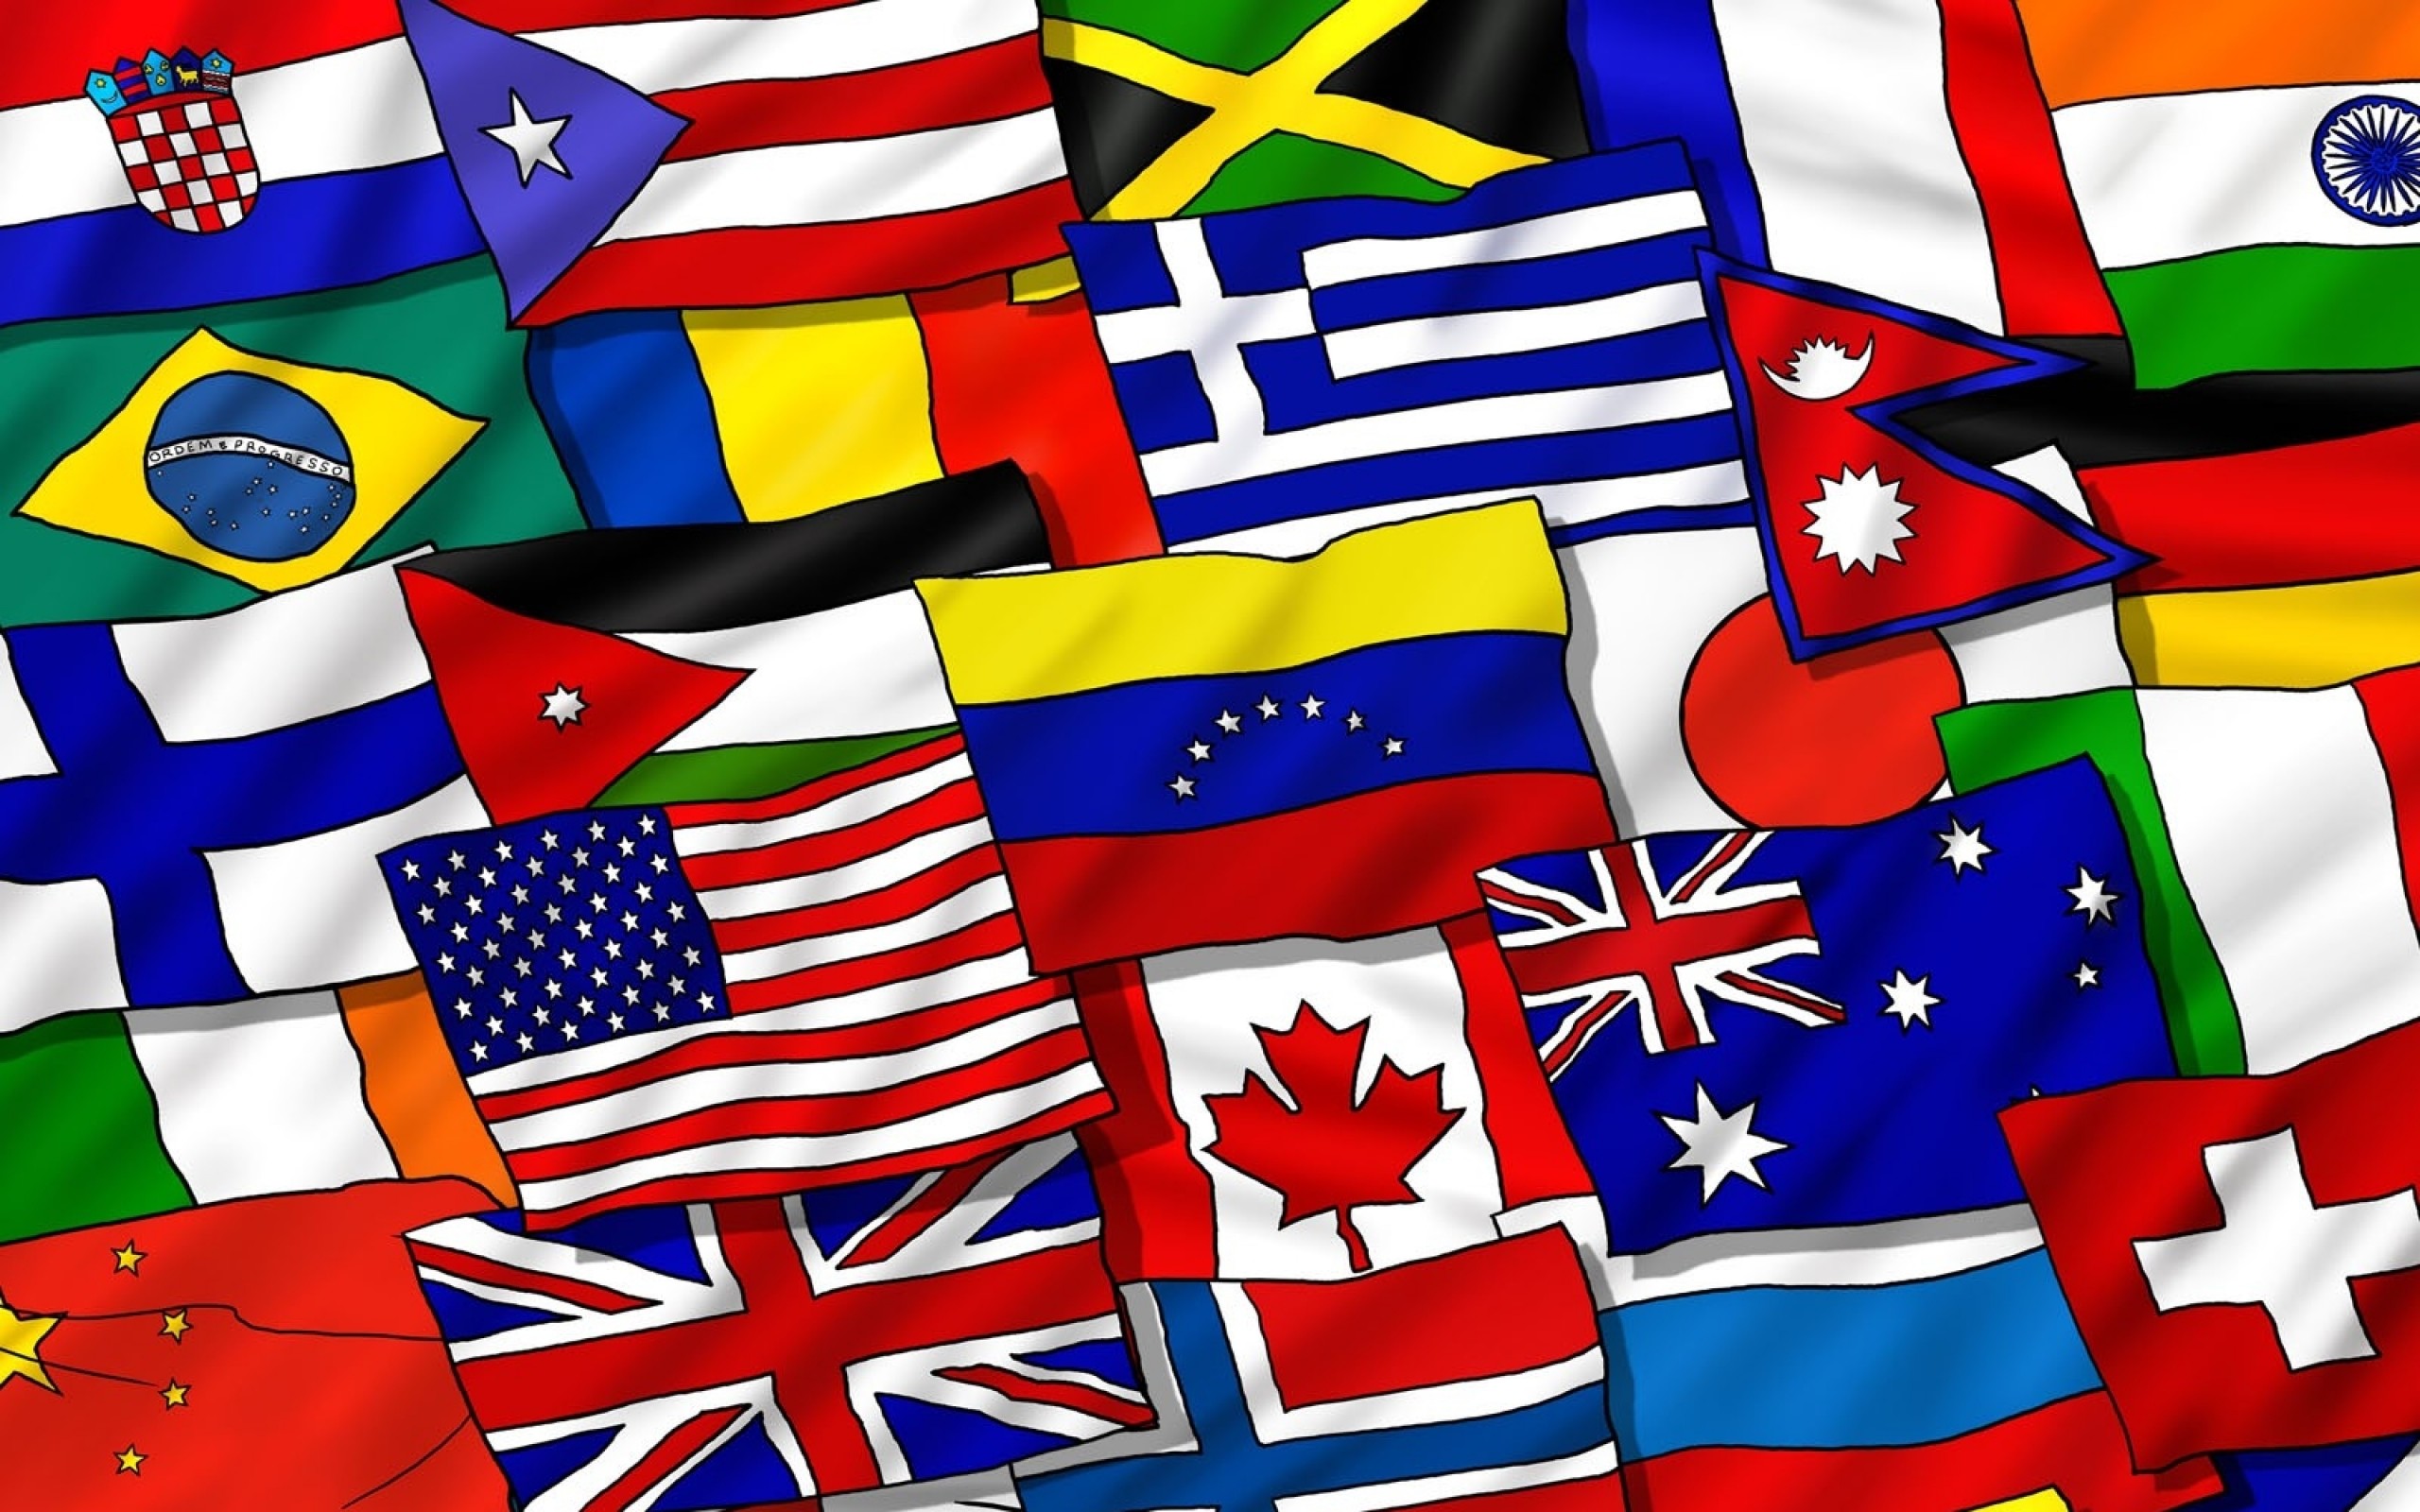 Country Flags Wallpaper Flags Of The World Country Flags World | The ...